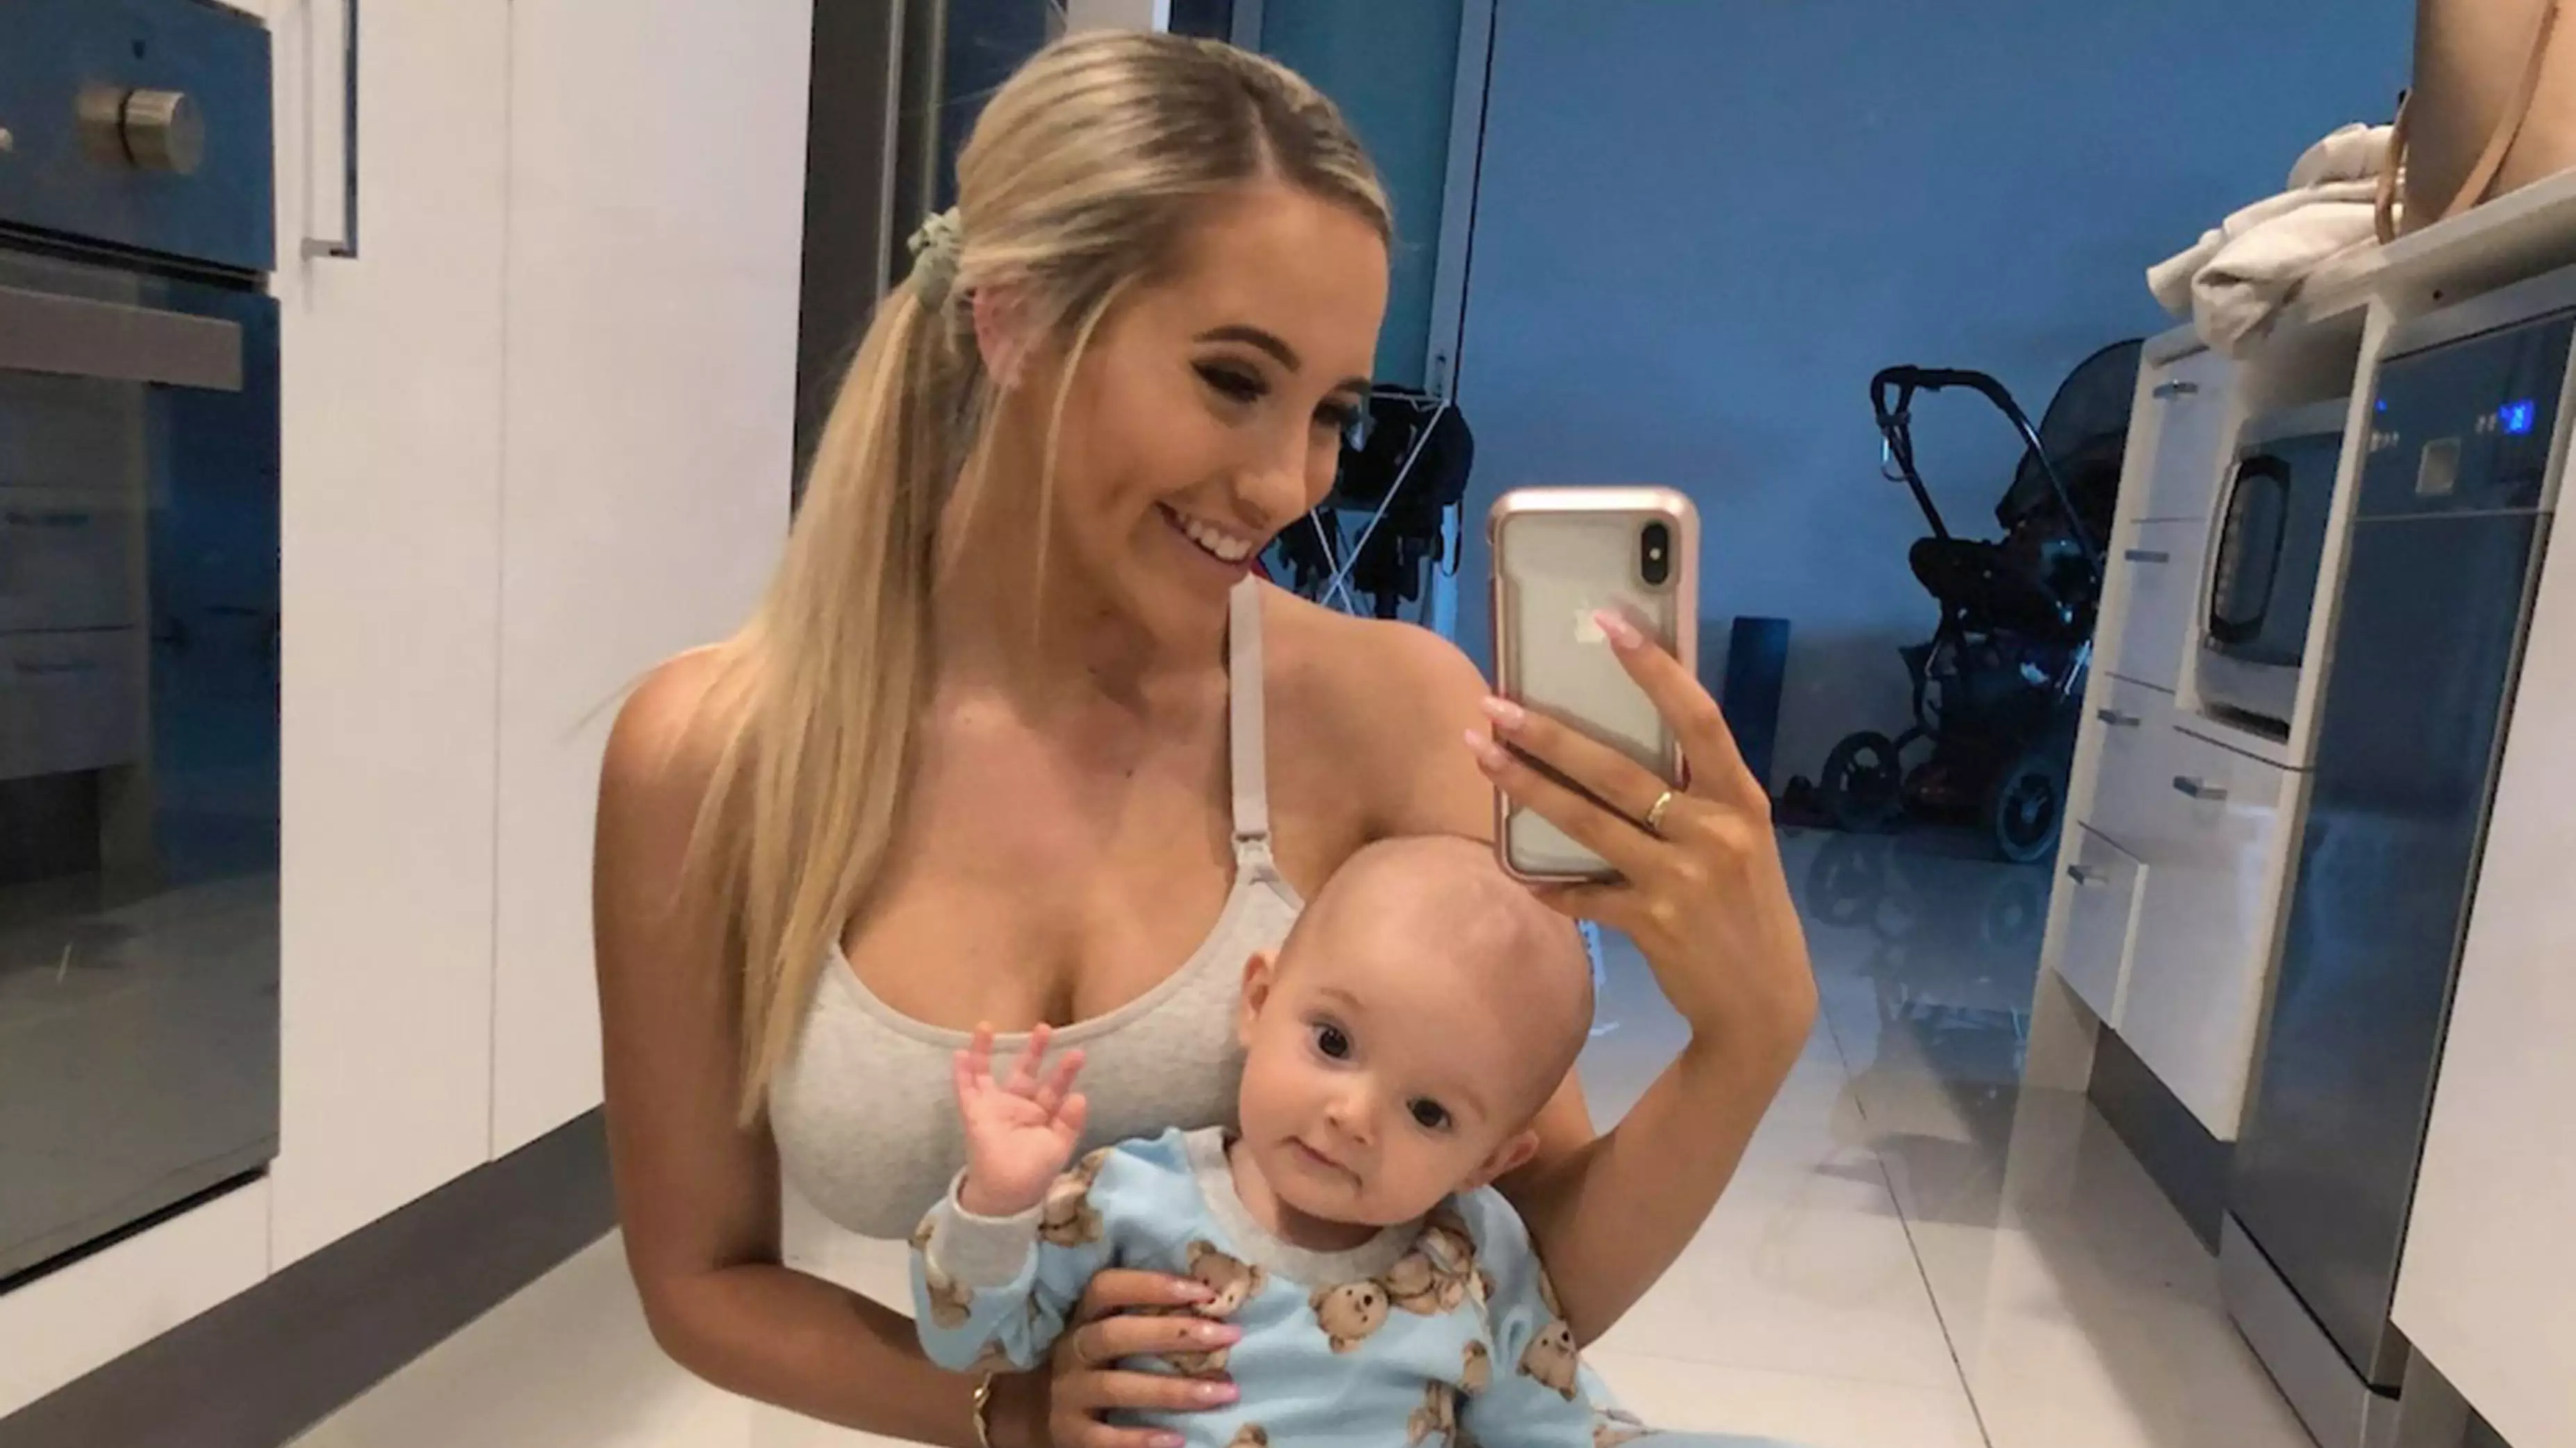 Woman Left Devastated After Cruel Trolls Said Her Son Was 'Too Old' To Be Breastfed